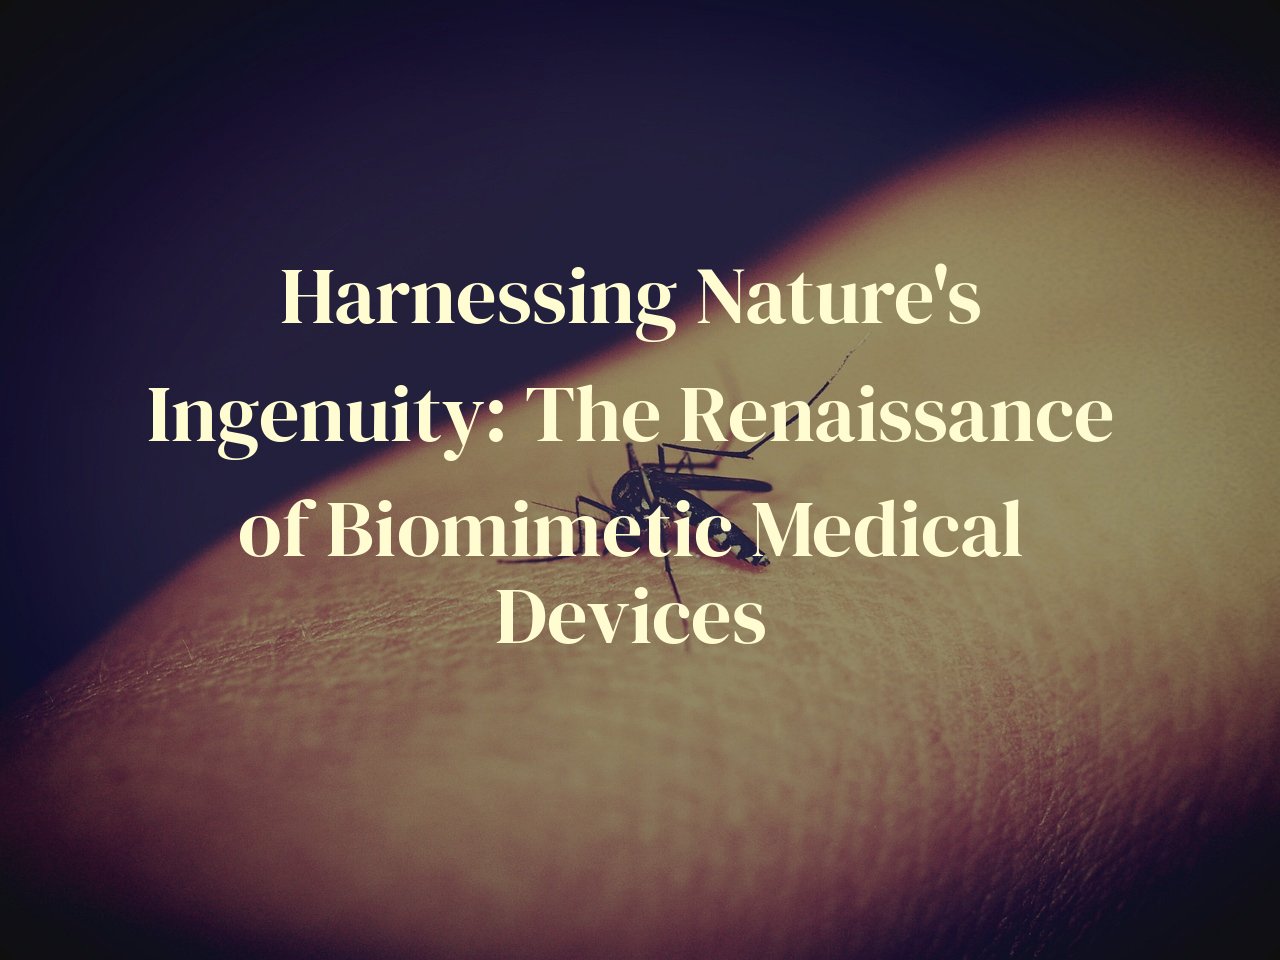 Harnessing Nature's Ingenuity: The Renaissance of Biomimetic Medical Devices